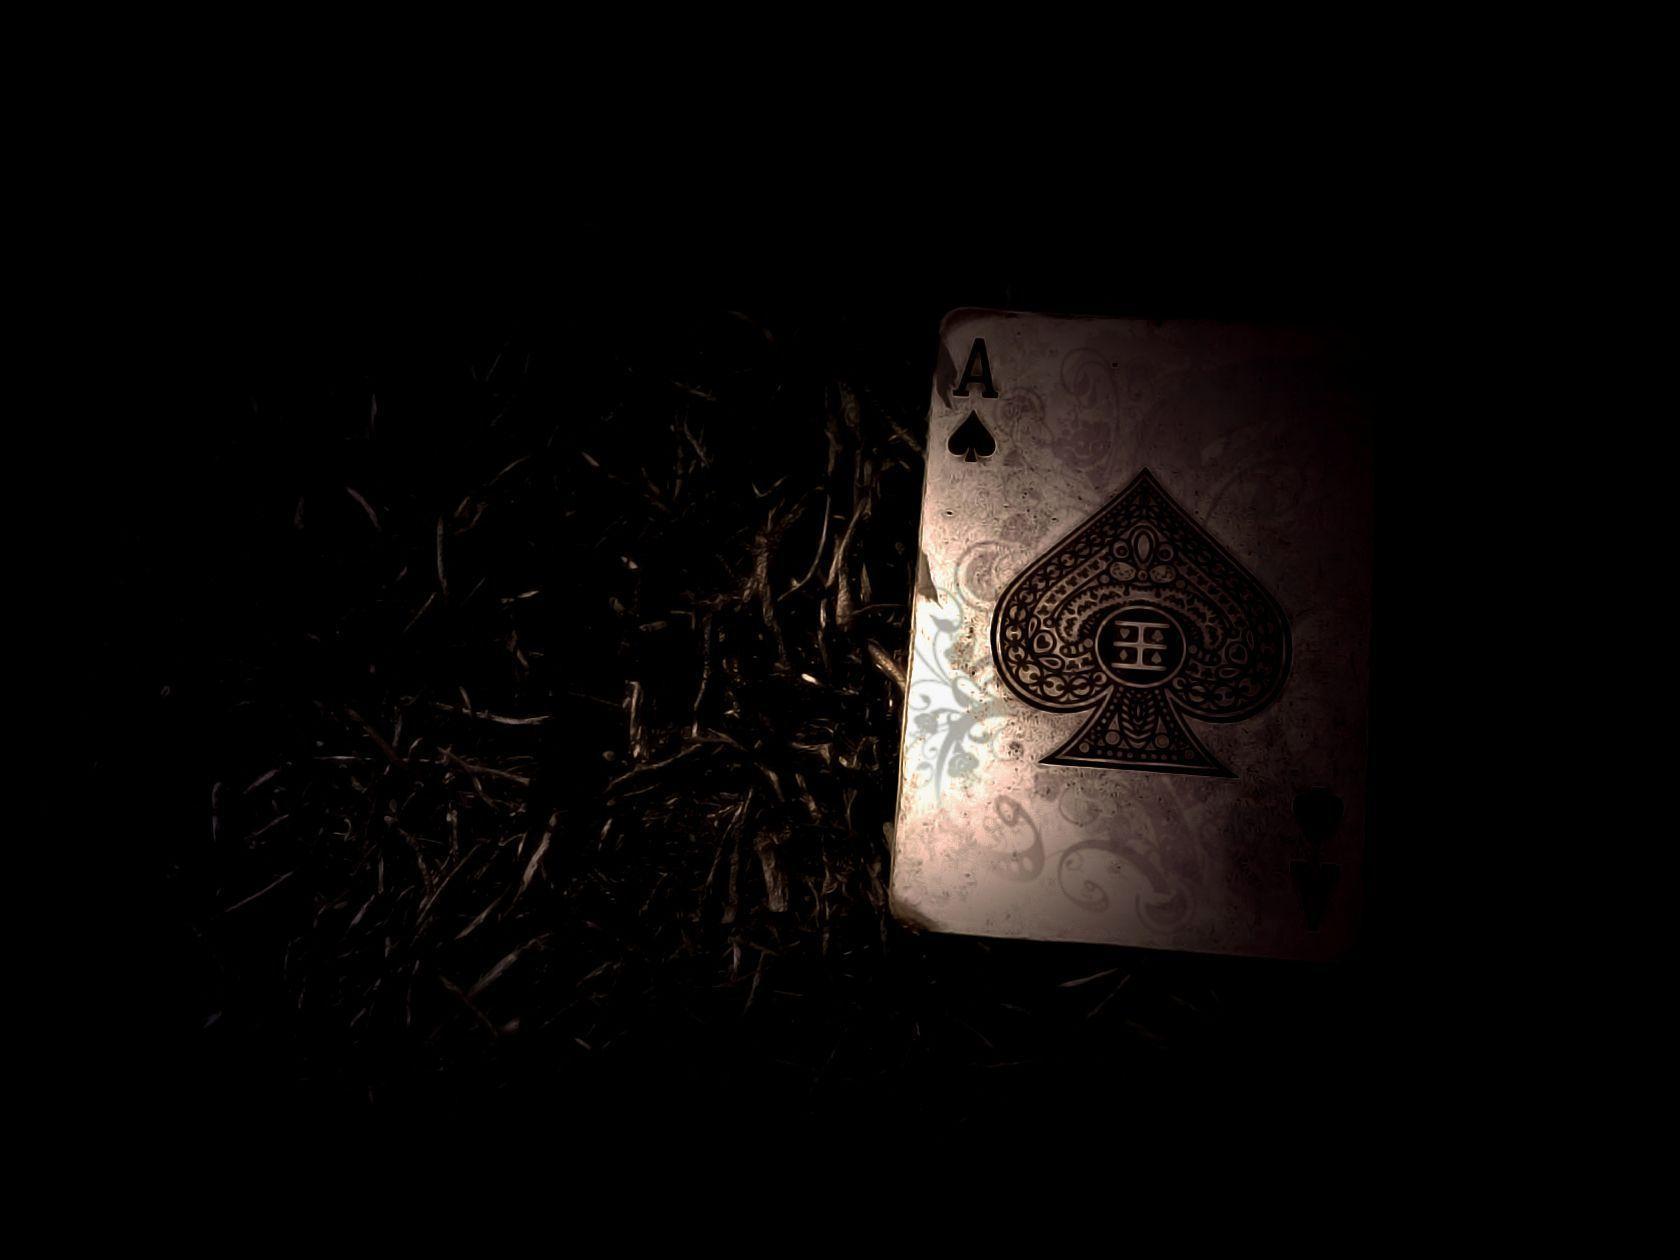 Playing Cards Wallpapers - Wallpaper Cave